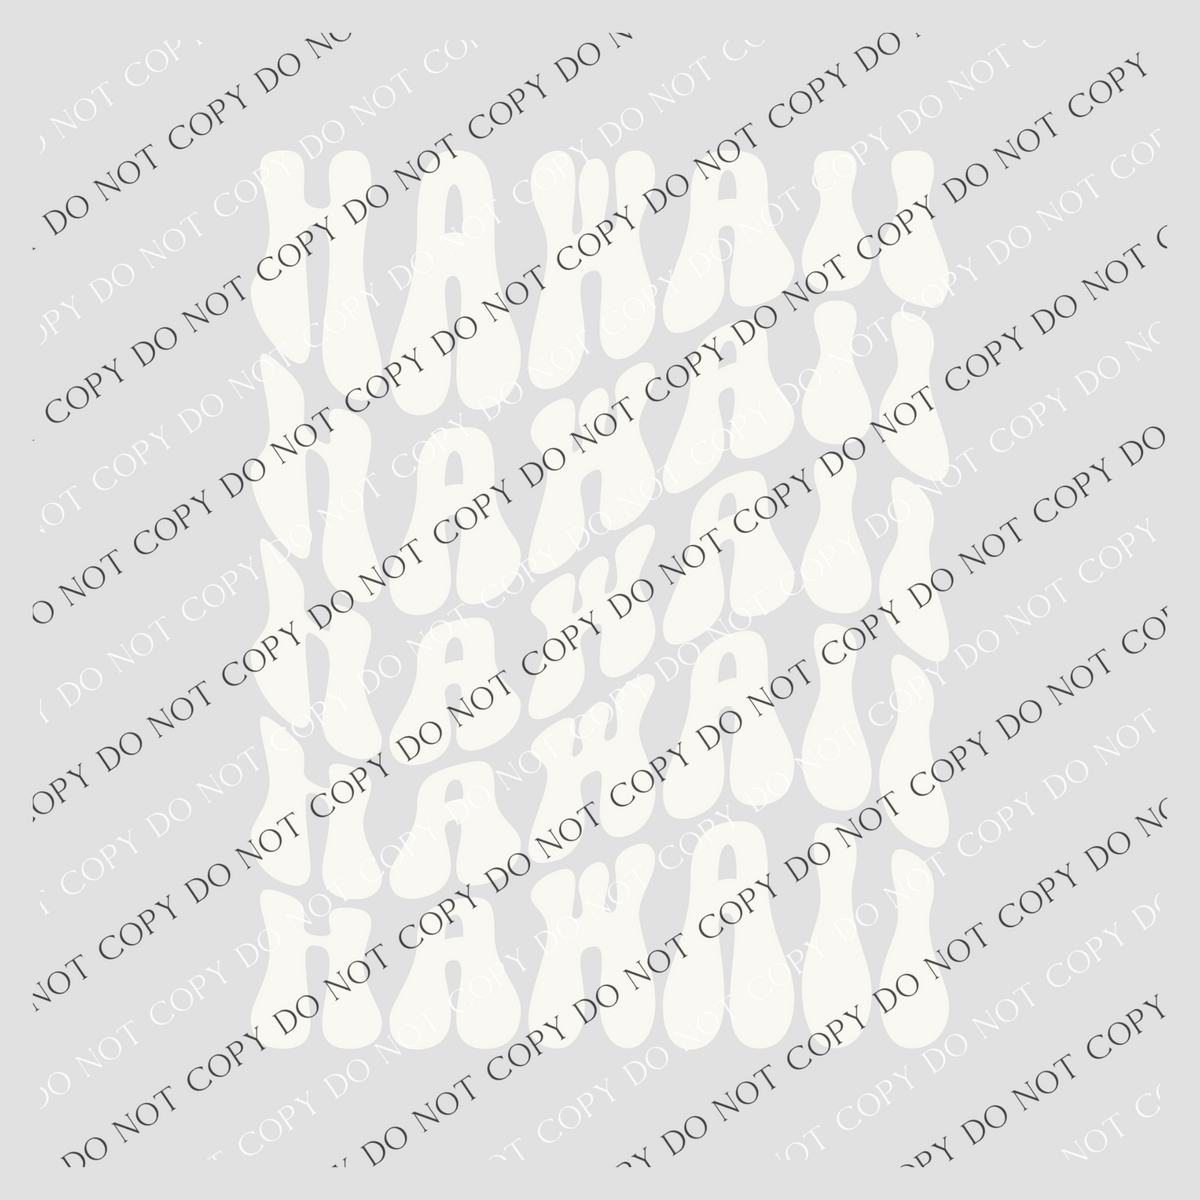 Hawaii Groovy Wave Stacked Digital Design PNG, Both Black and White Designs Incuded